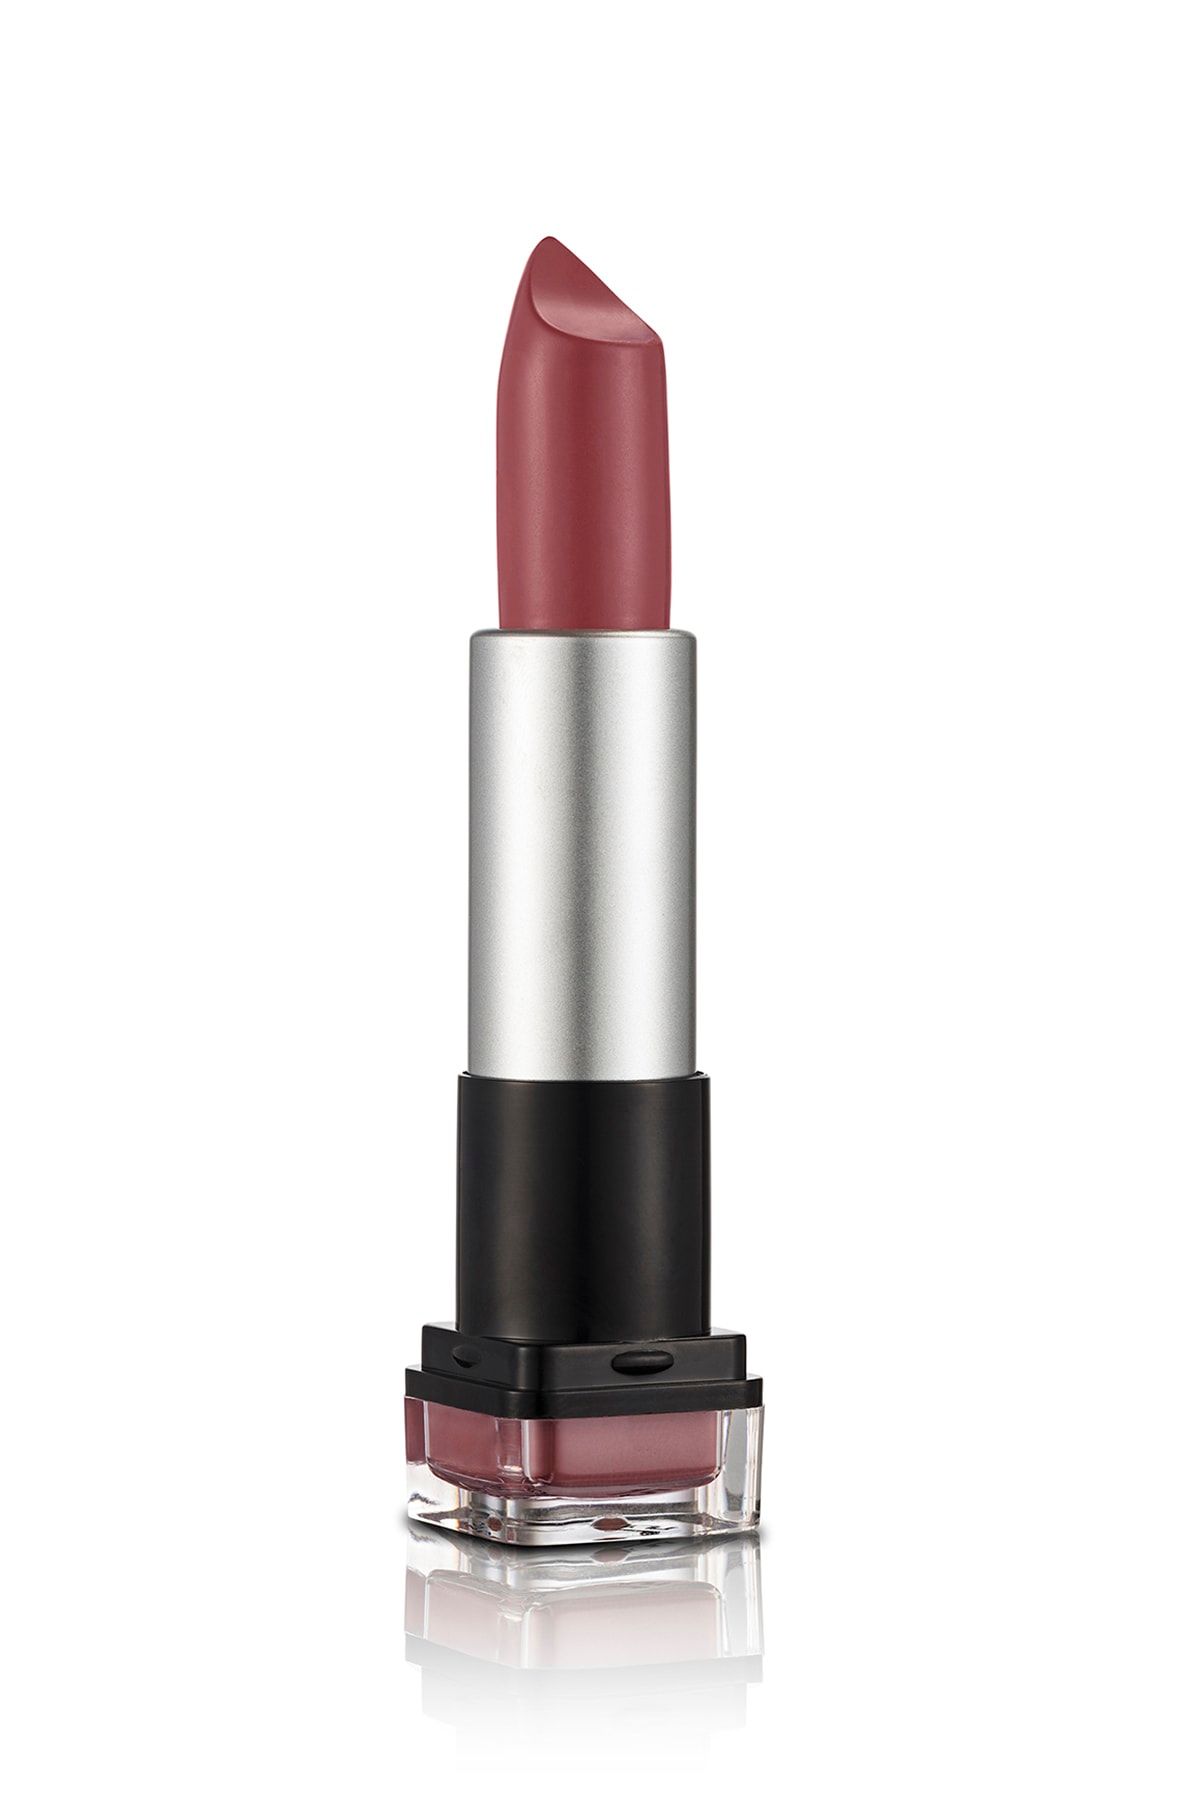 Flormar Ruj - Hd Weightless Lipstick Subdued Rosy 01 8690604648726